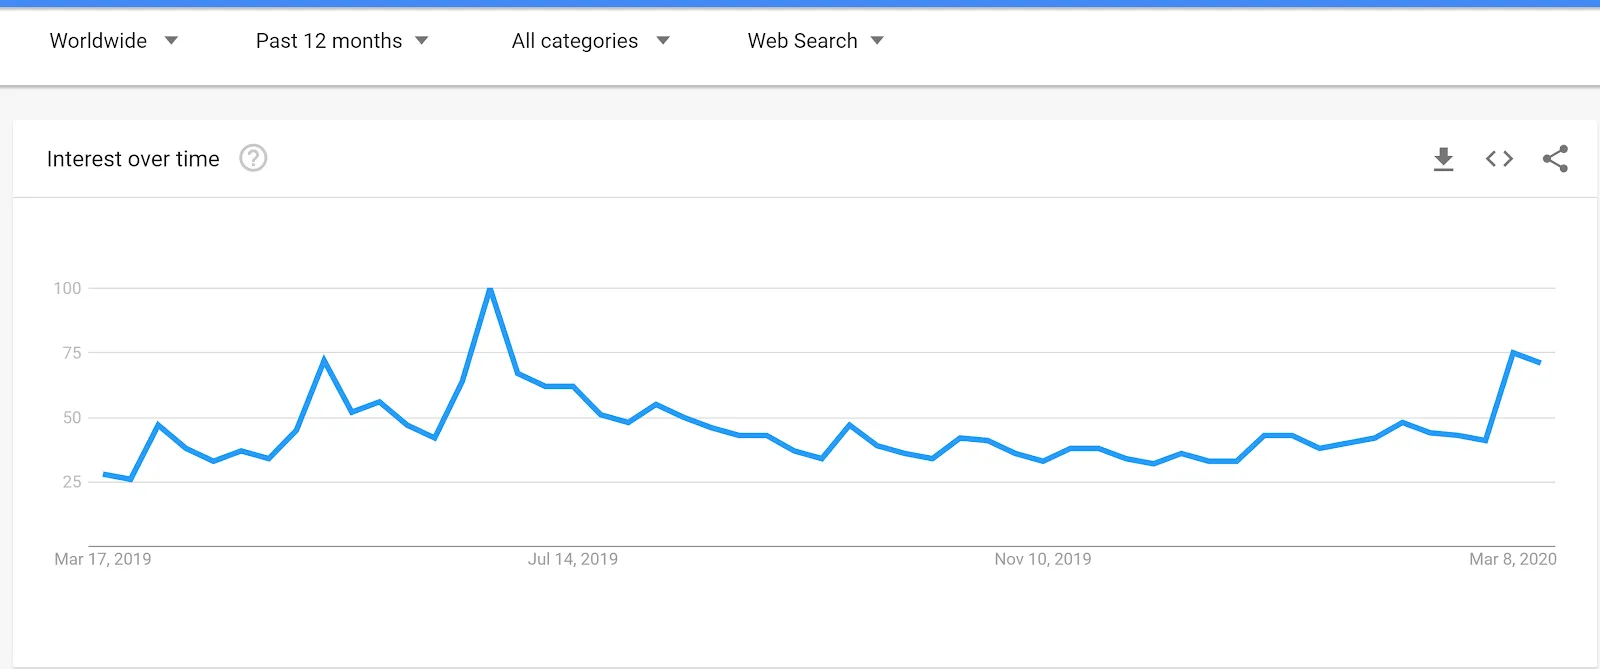 Google Trends shows that interest in Bitcoin rose last week